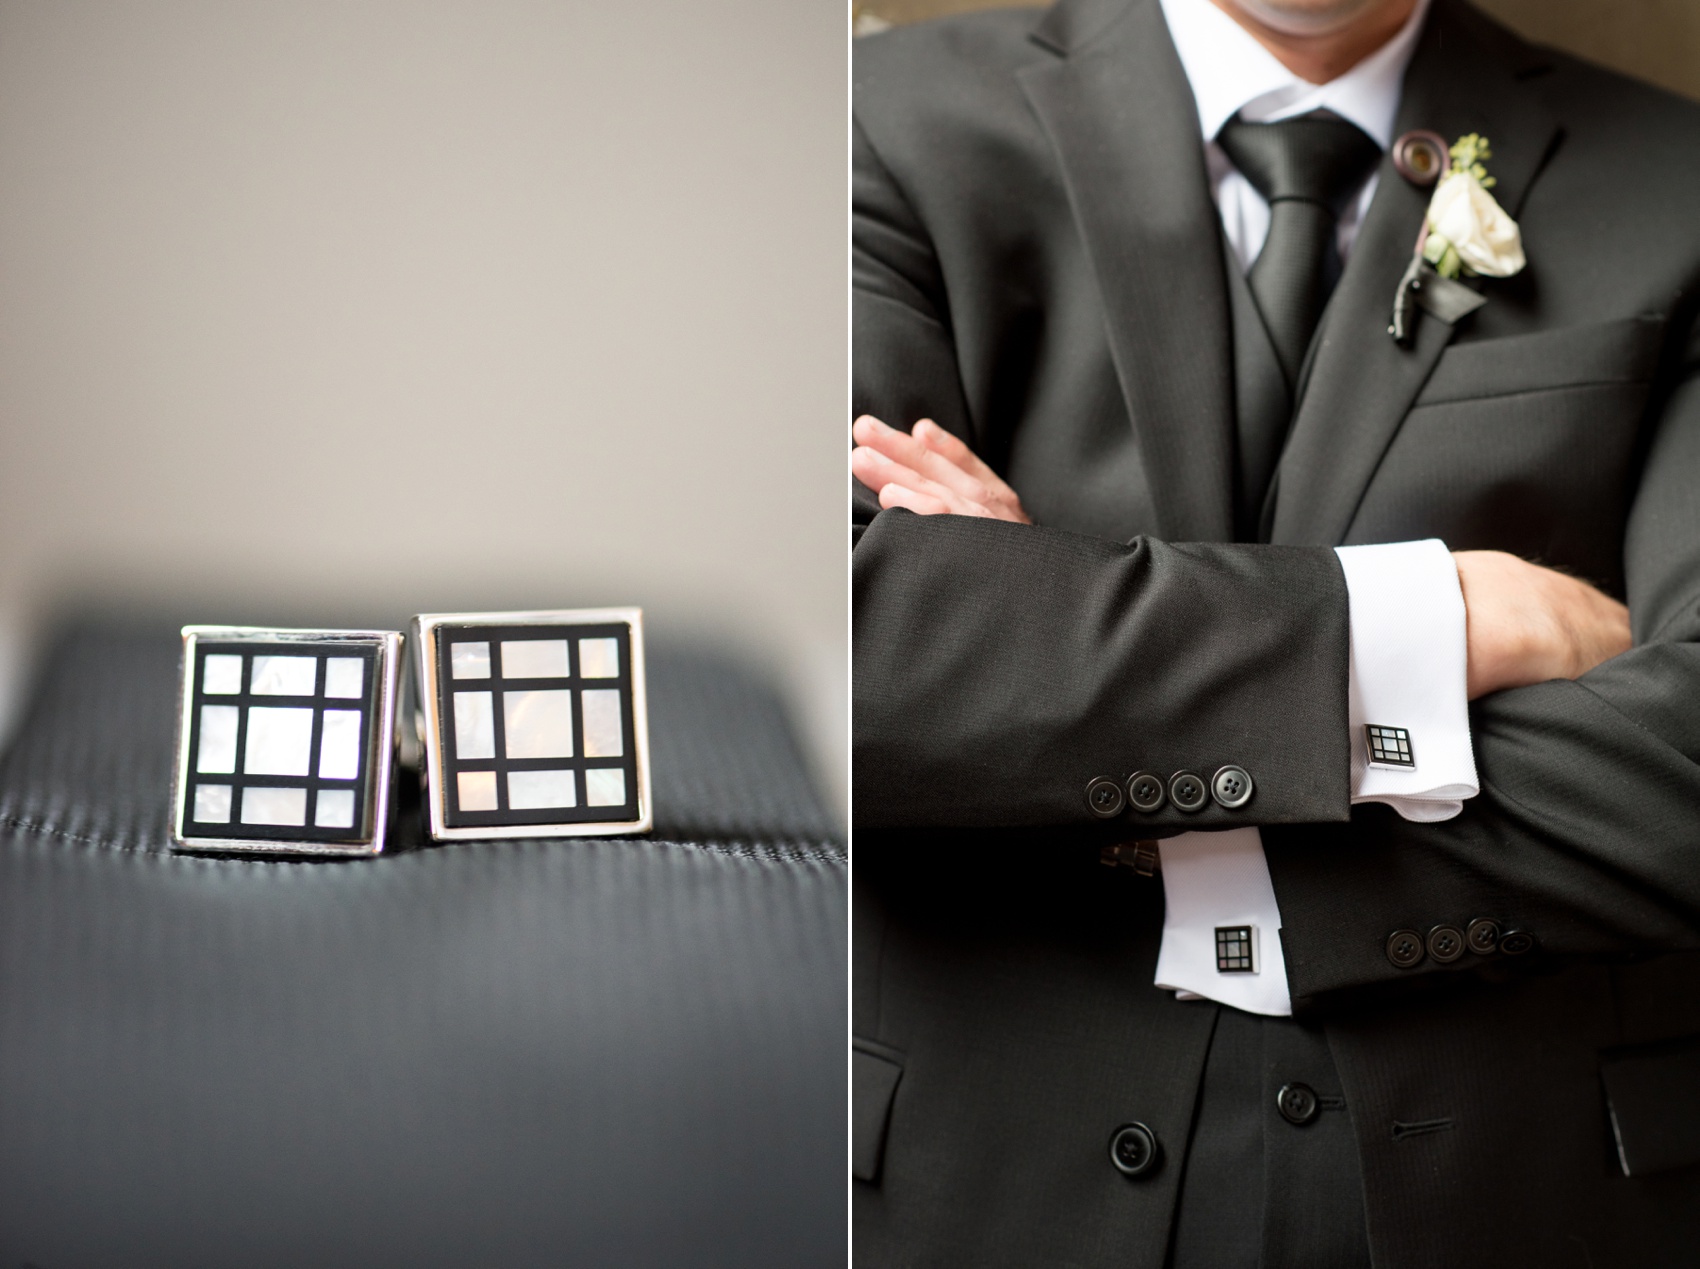 Bay 7 wedding photos by Mikkel Paige Photography. Raleigh wedding photographer captures the groom preparing and square black and mother of pearl cufflinks. 